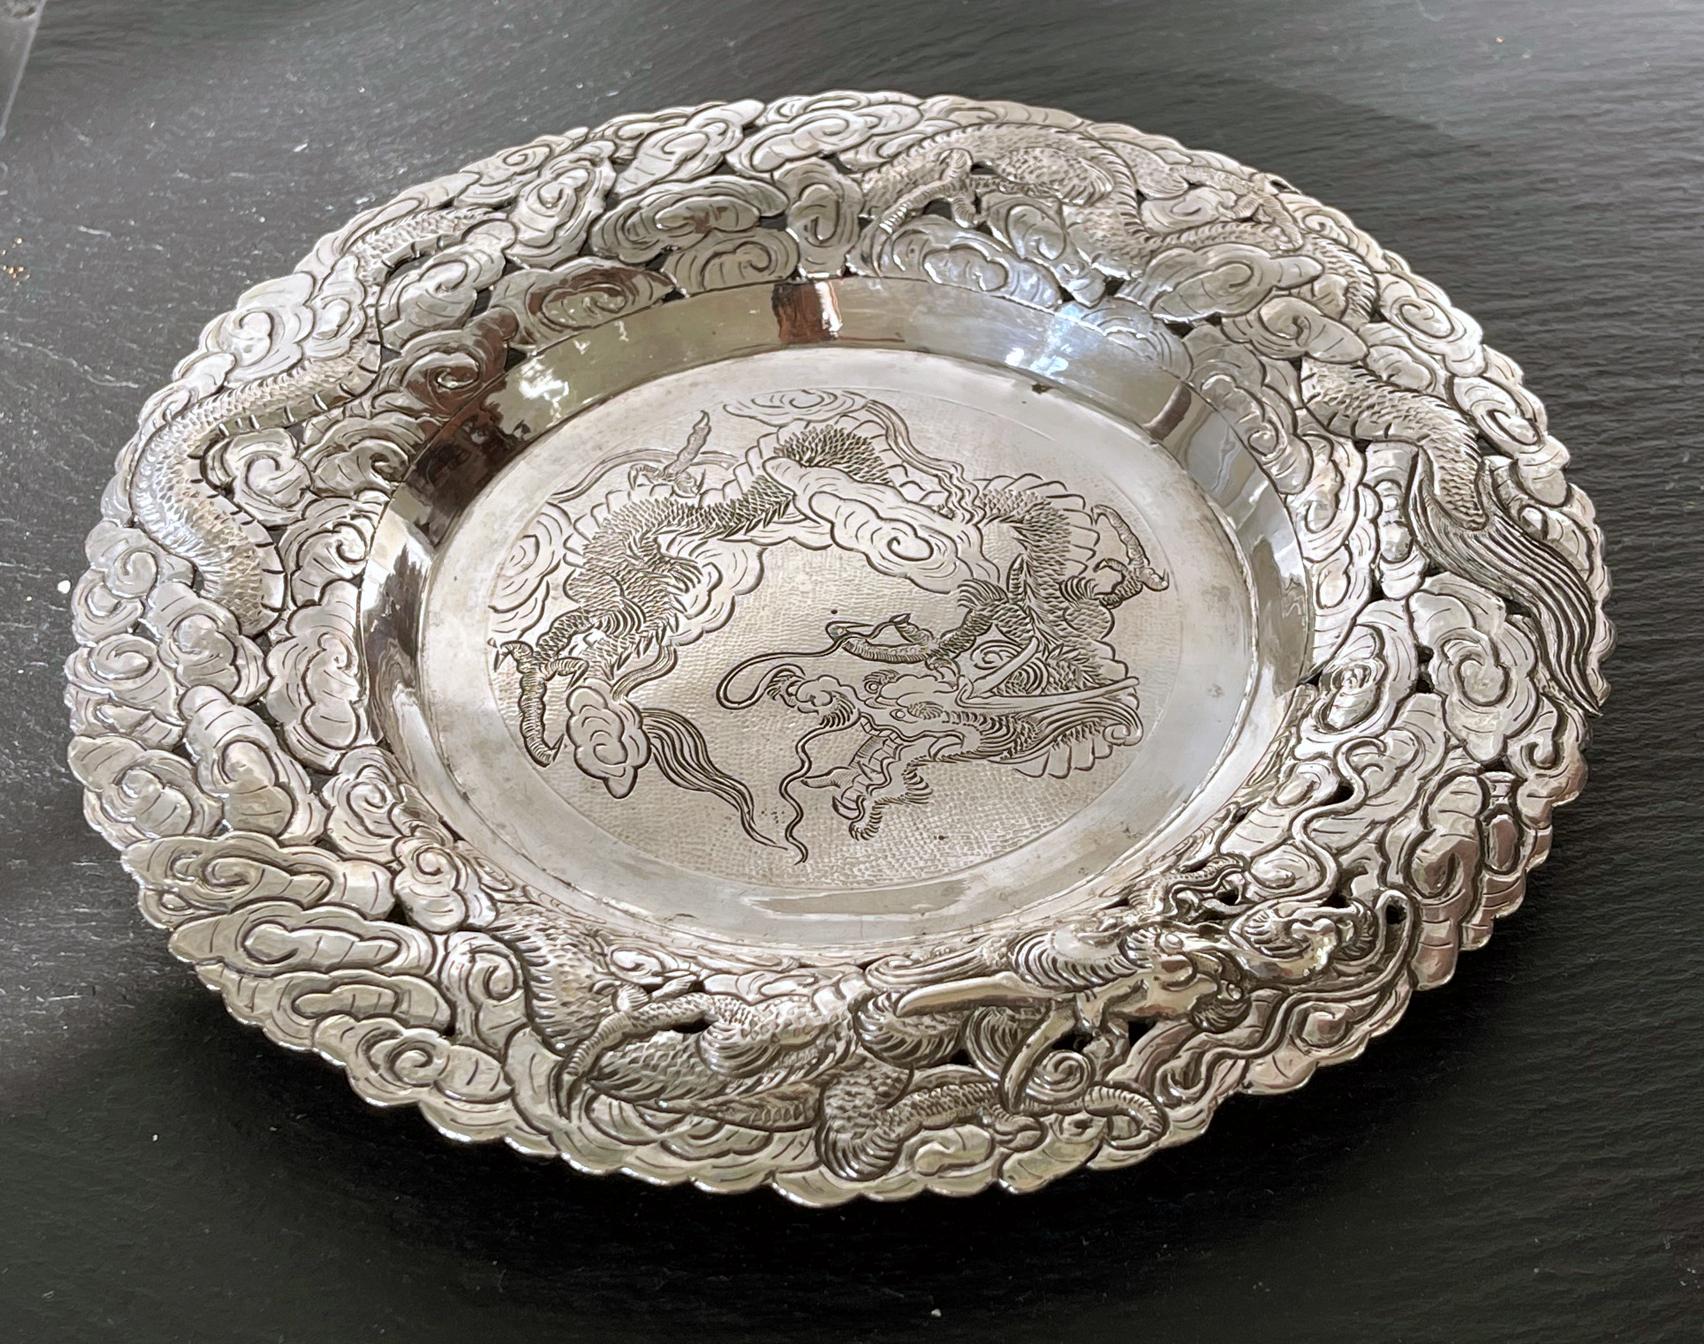 An elaborately decorated silver serving dish or butler's tray, likely dated to the turn of the 20th century, made in China for the export market. The round tray has a solid center in contrast with a pierced outer band of repoussé design that depicts